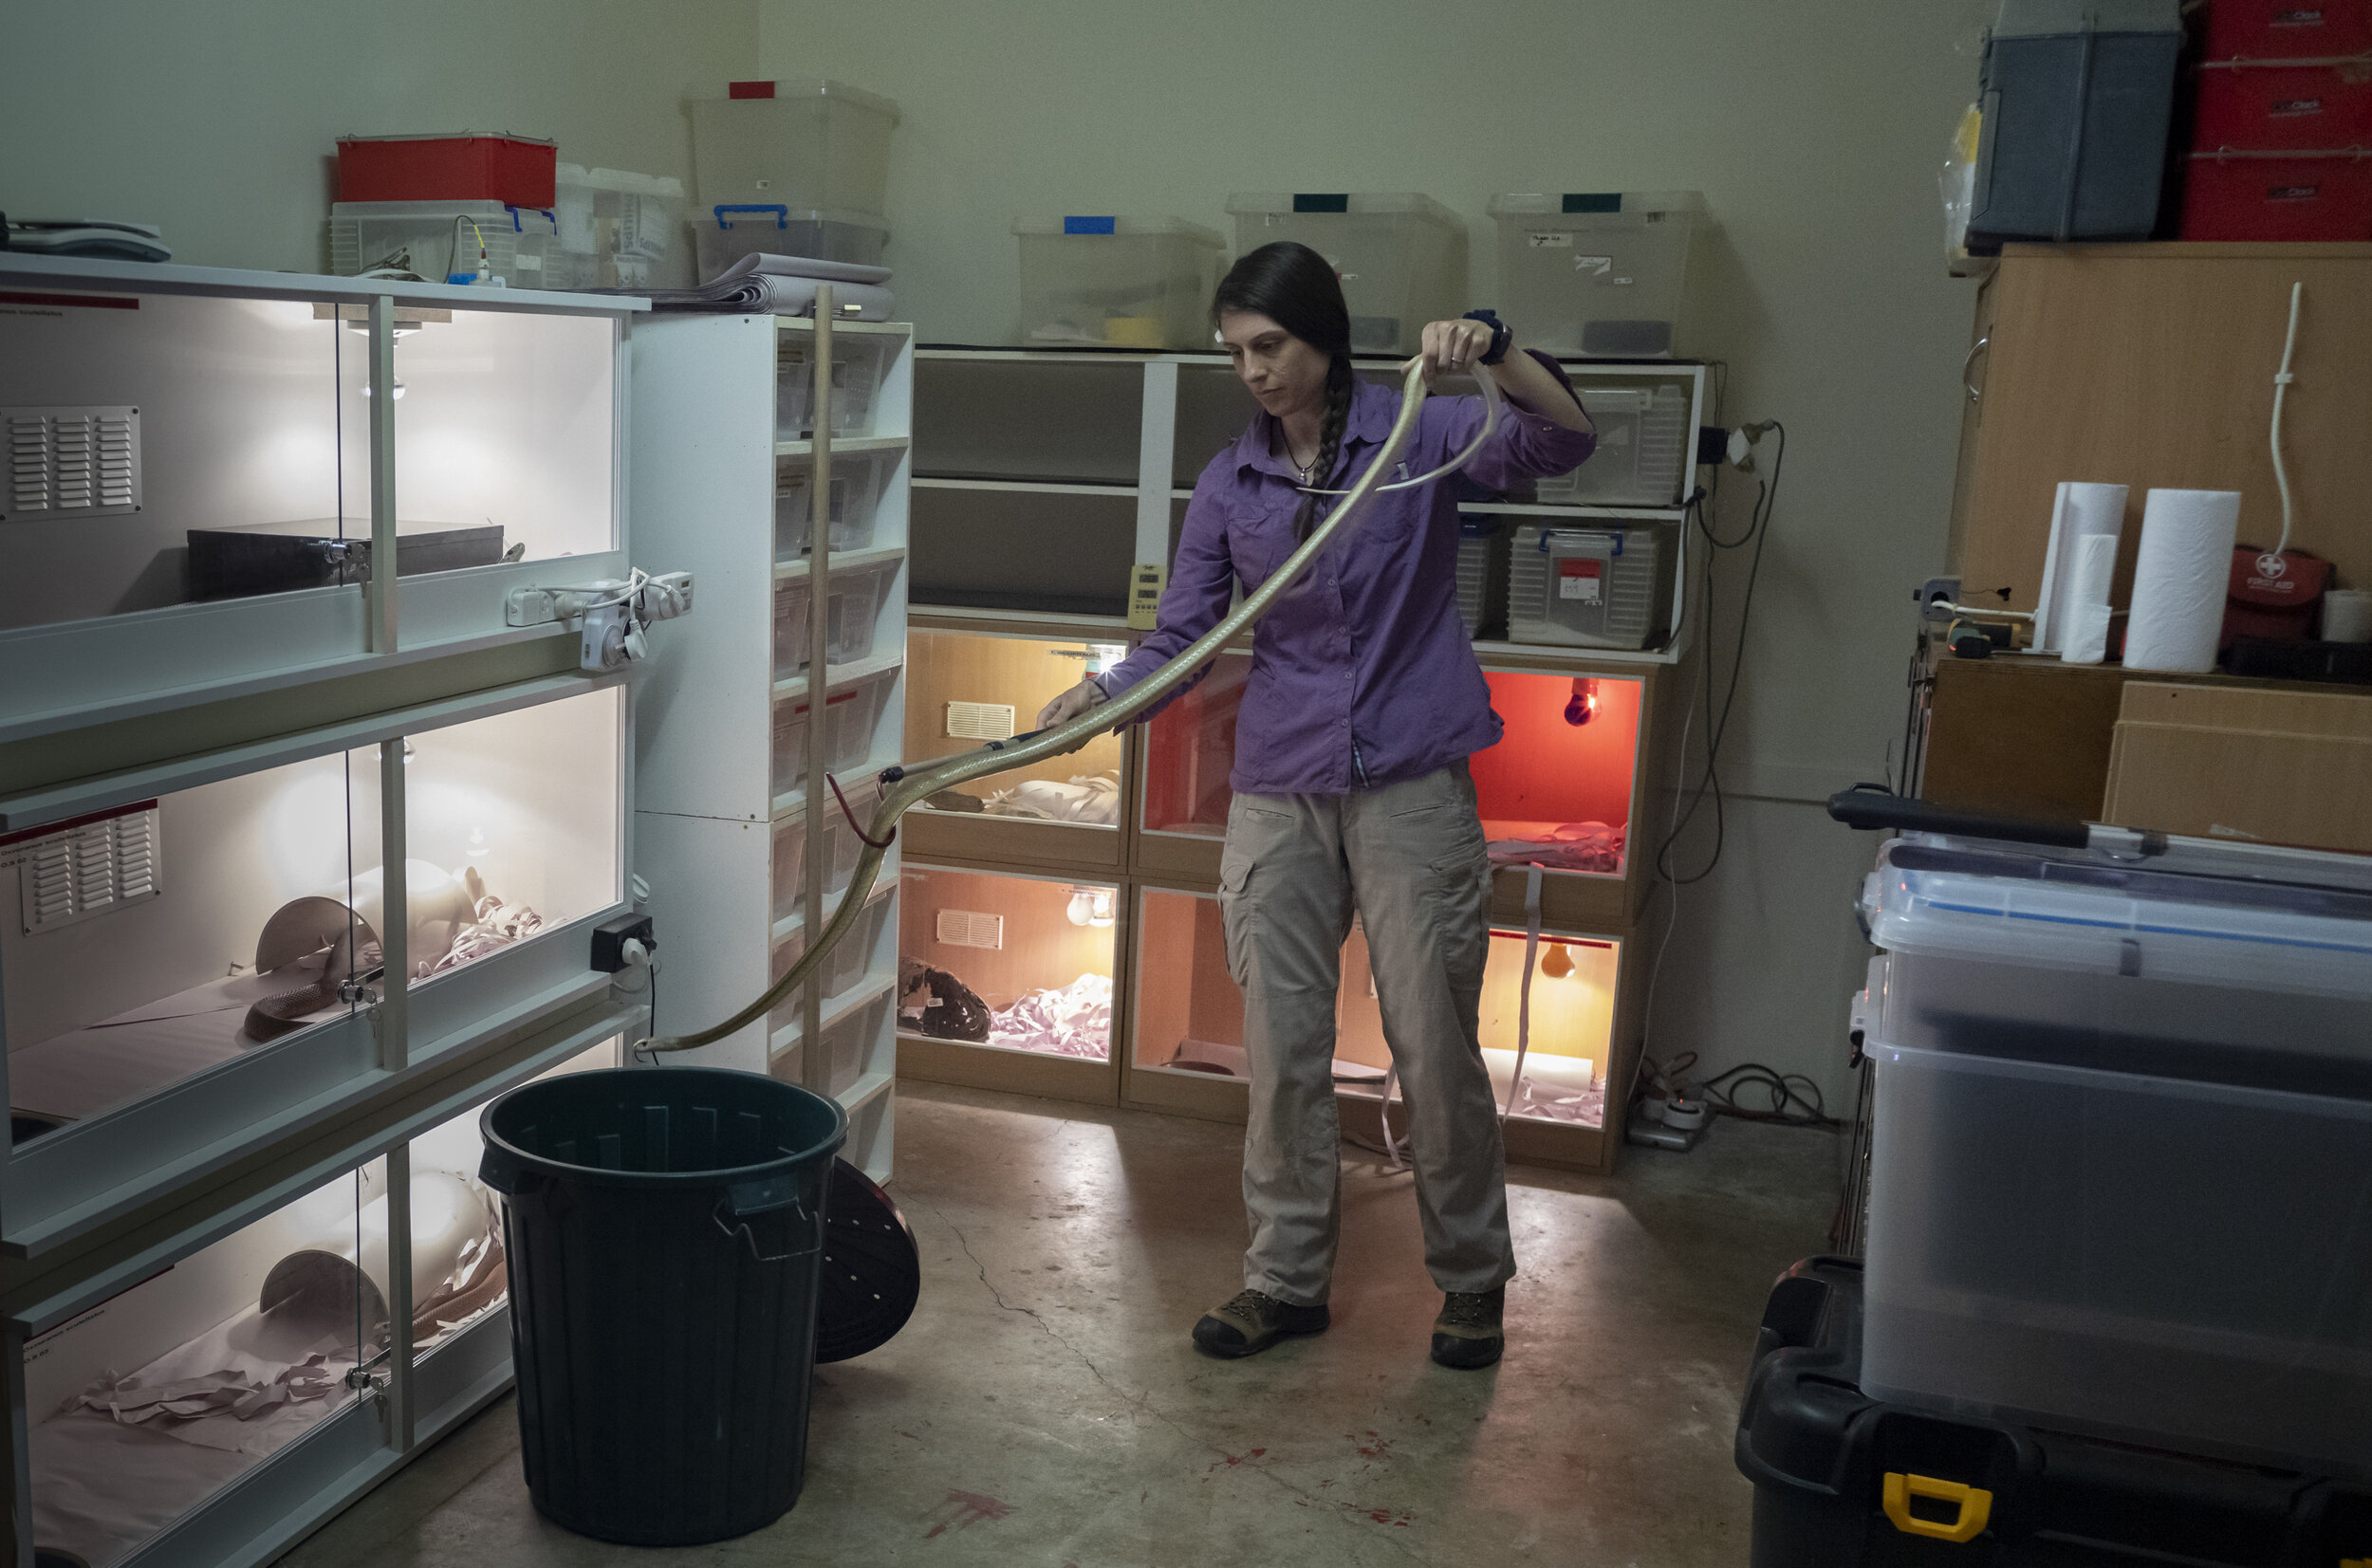  Christina Zdenek, a postdoctoral research fellow at Gehrman Labs University of Qld.Christina is photographed at home in Brisbane where she keeps some of Australias' most venomous snakes stored in her garage. Christina is moving a Coastal Taipan (Oxy